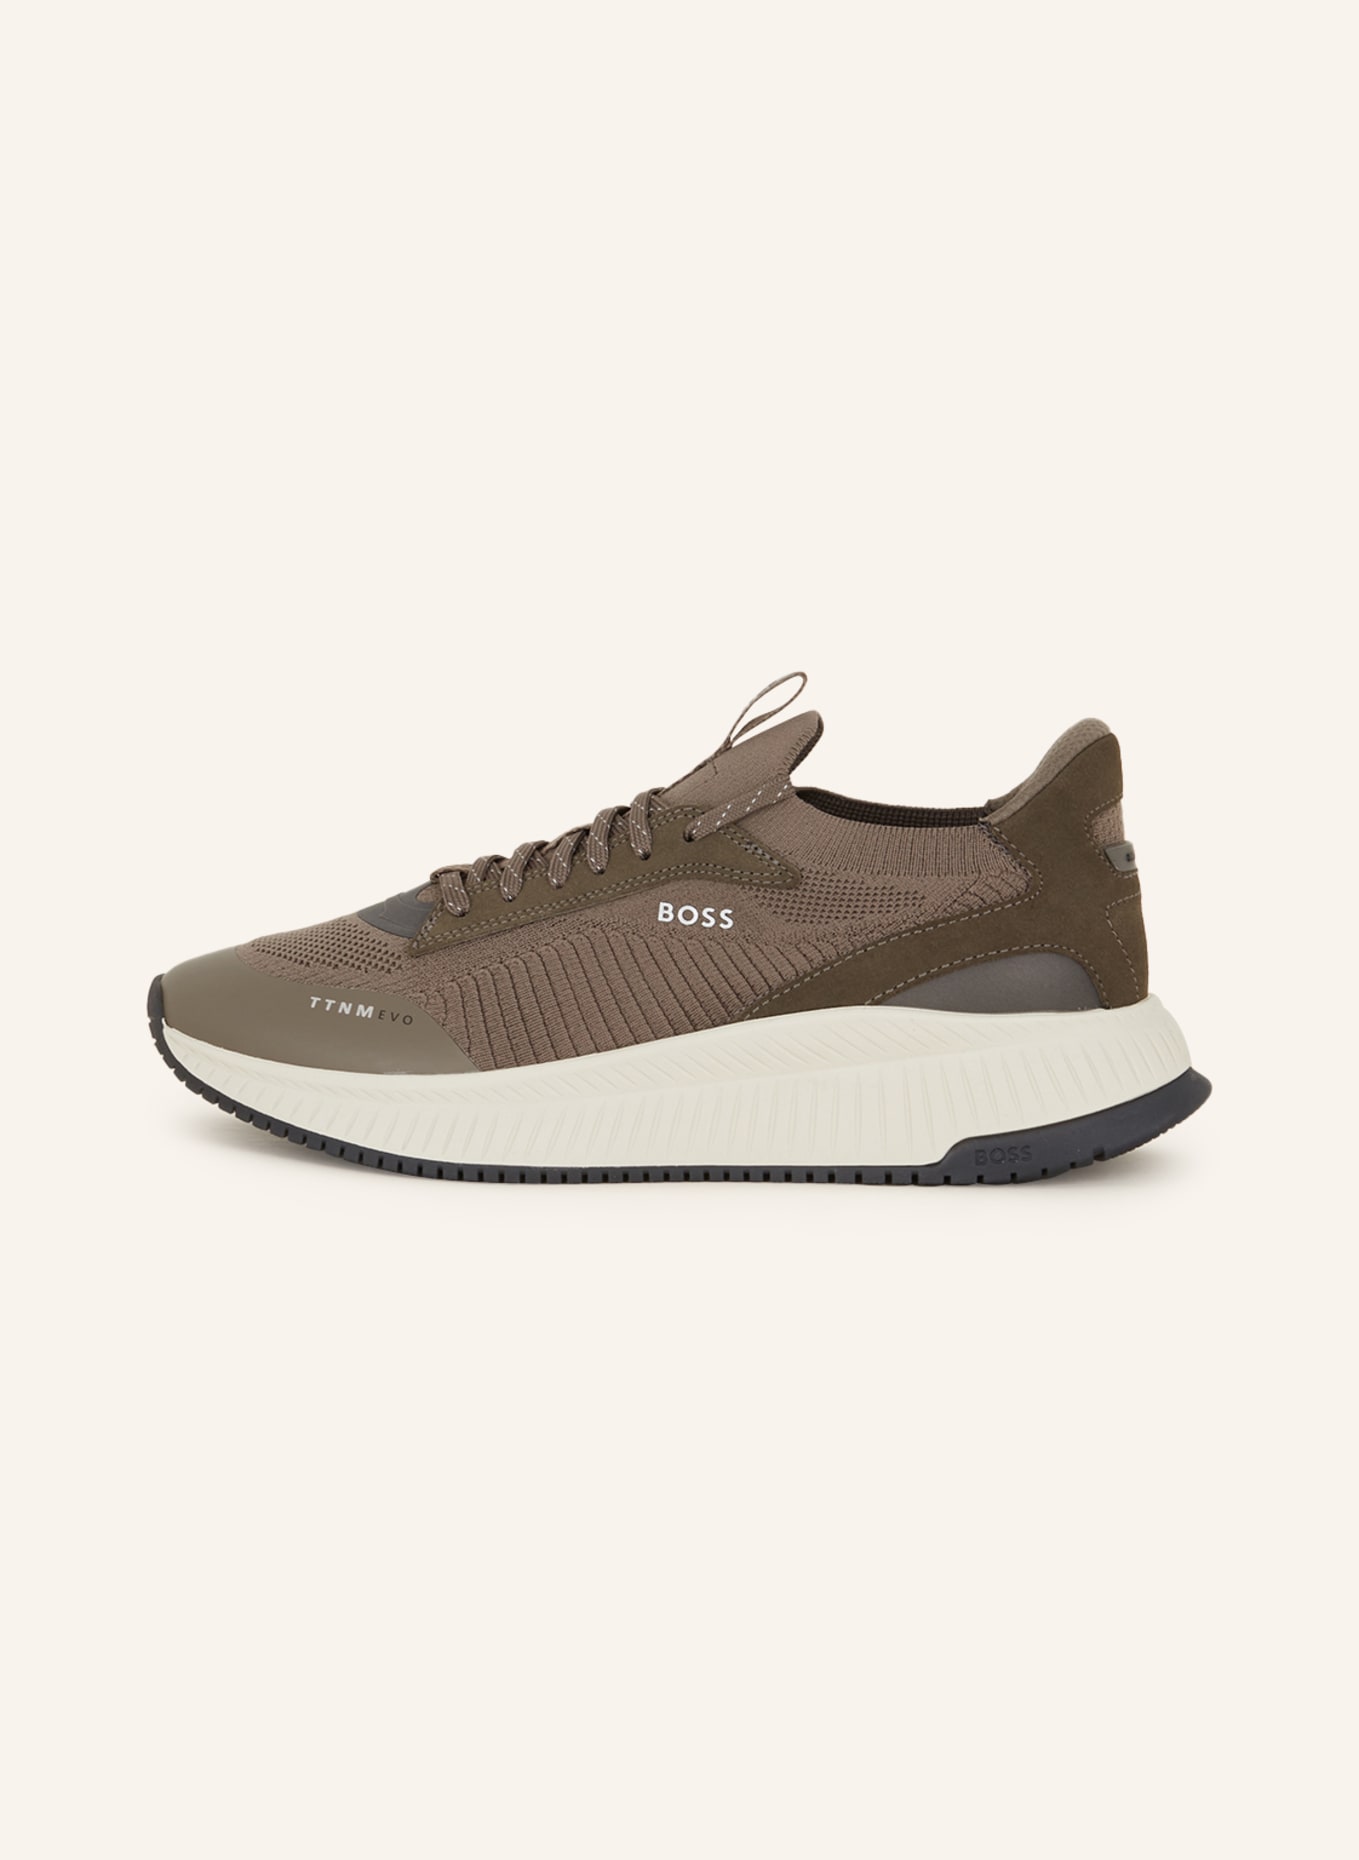 BOSS Sneakers TTNM EVO, Color: TAUPE (Image 4)